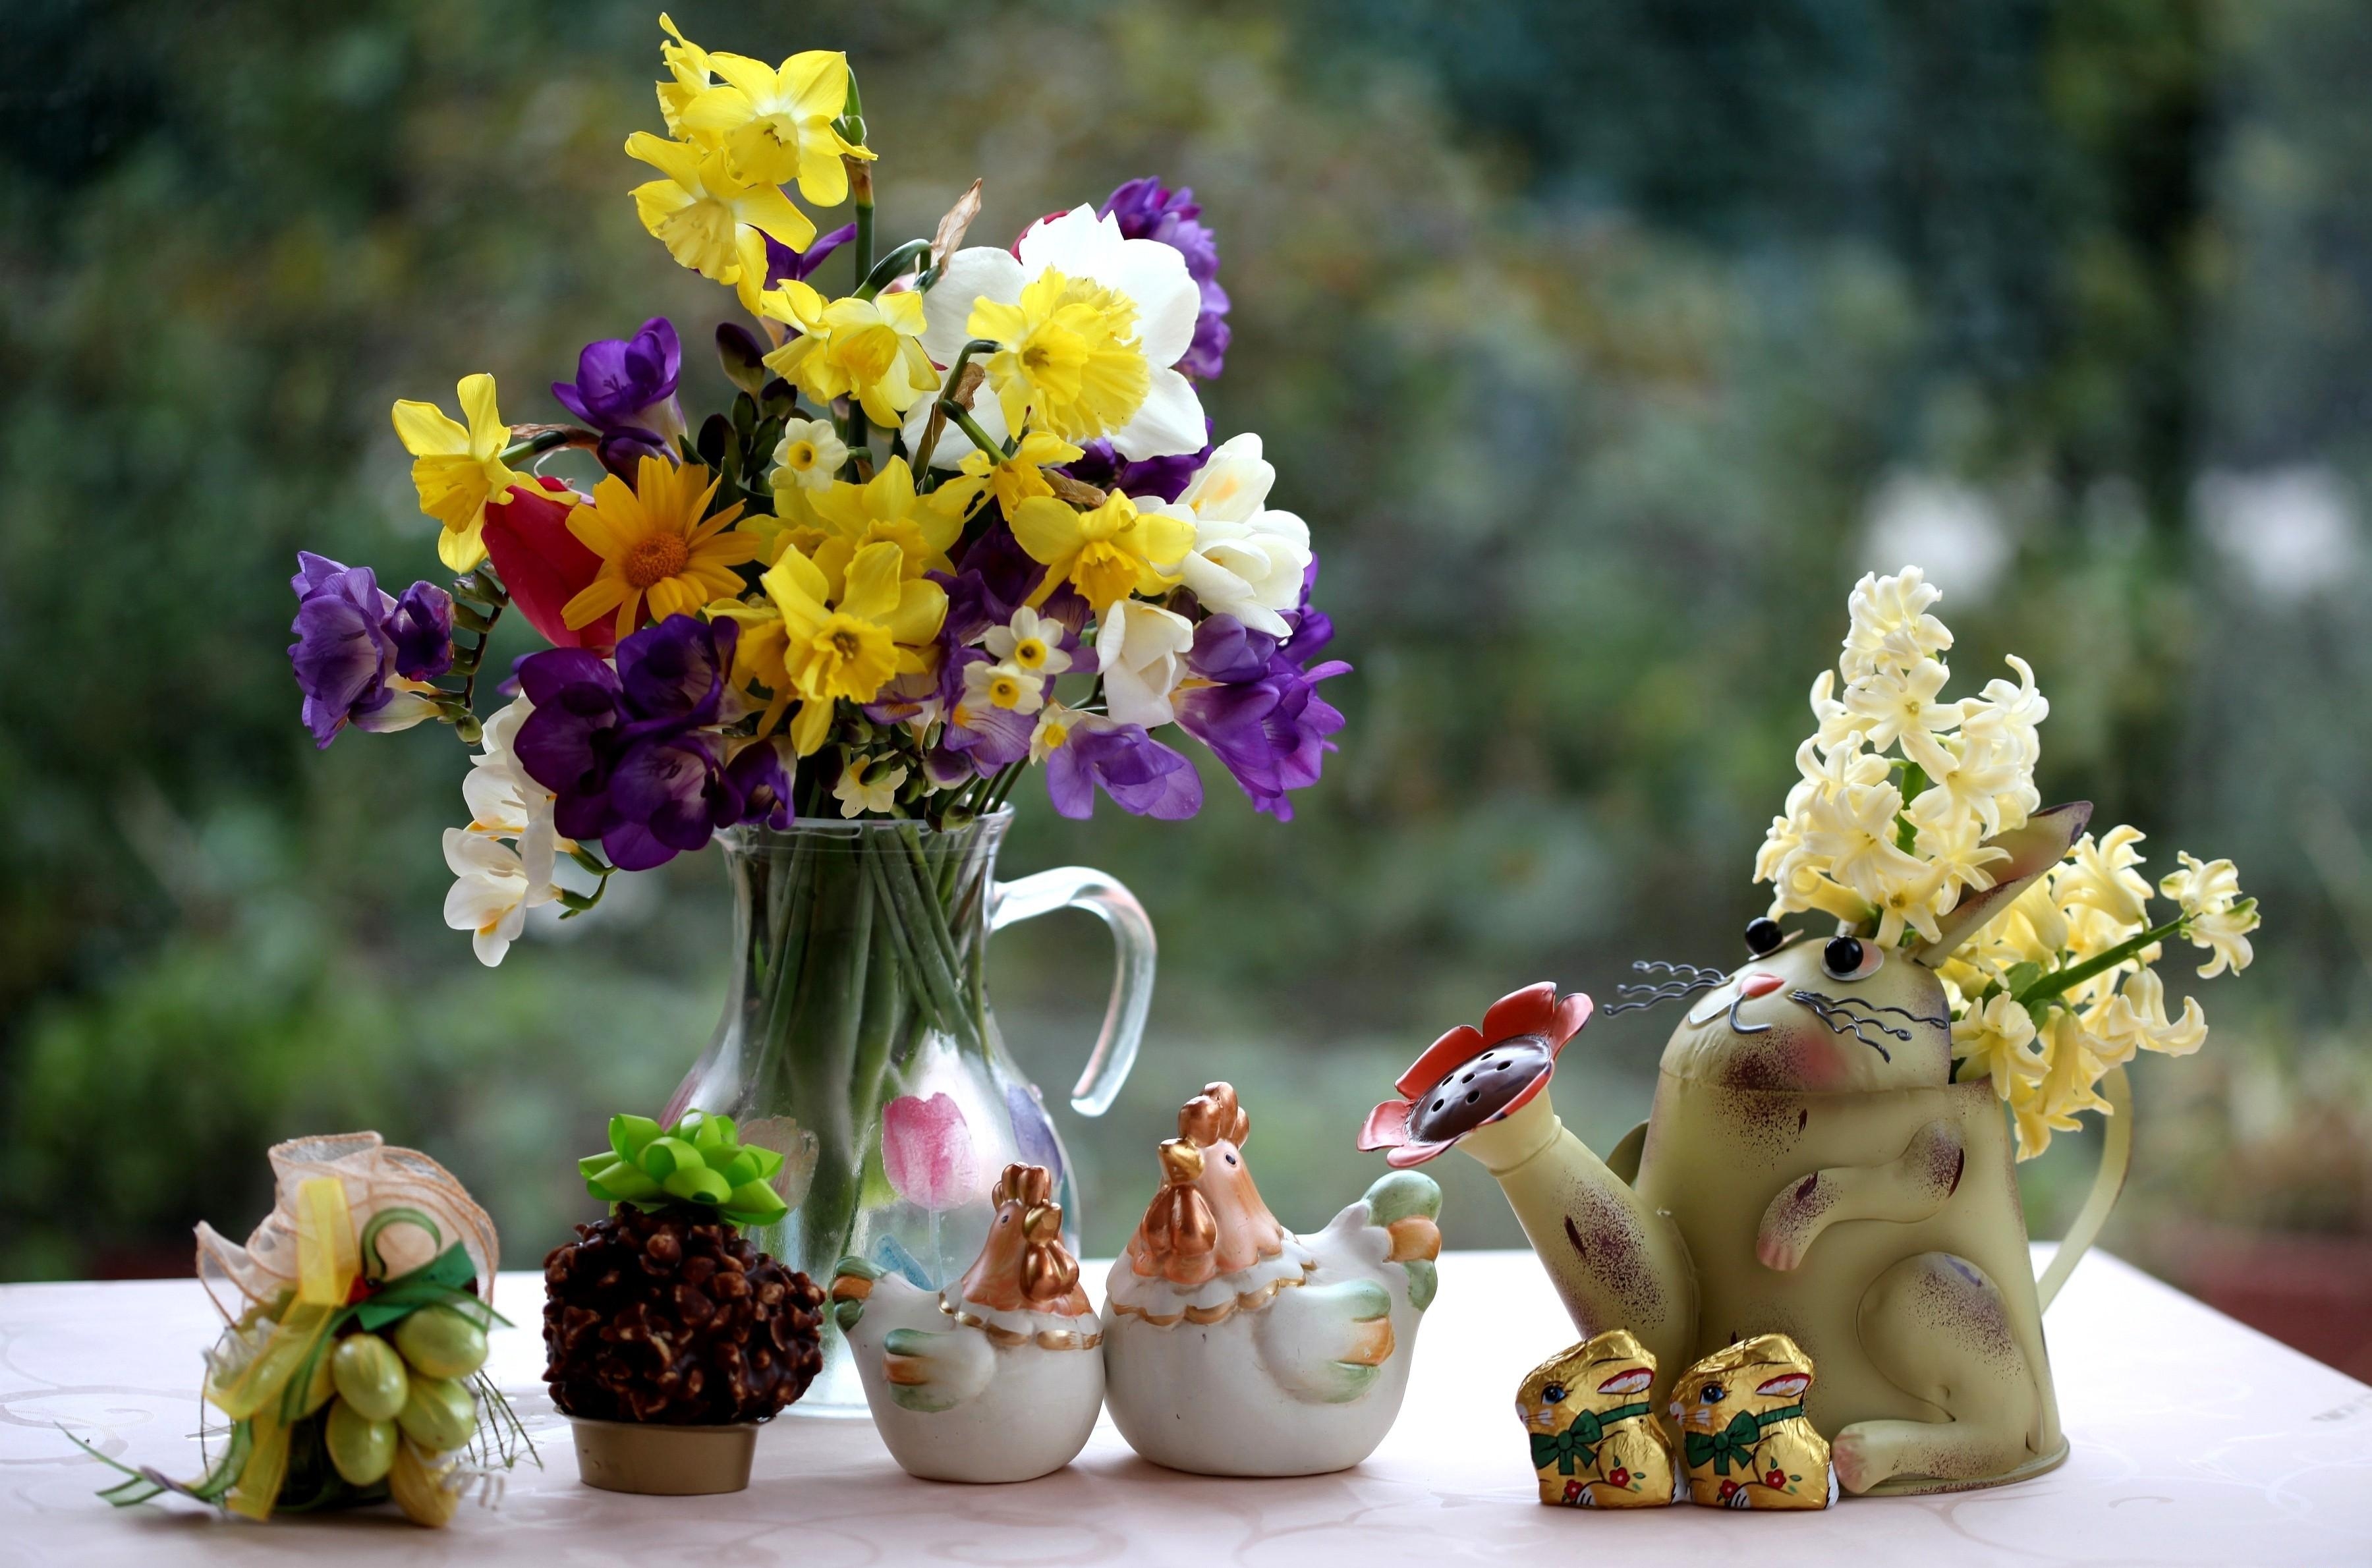 chicken, rabbits, bouquet, narcissussi HD Wallpaper for Phone